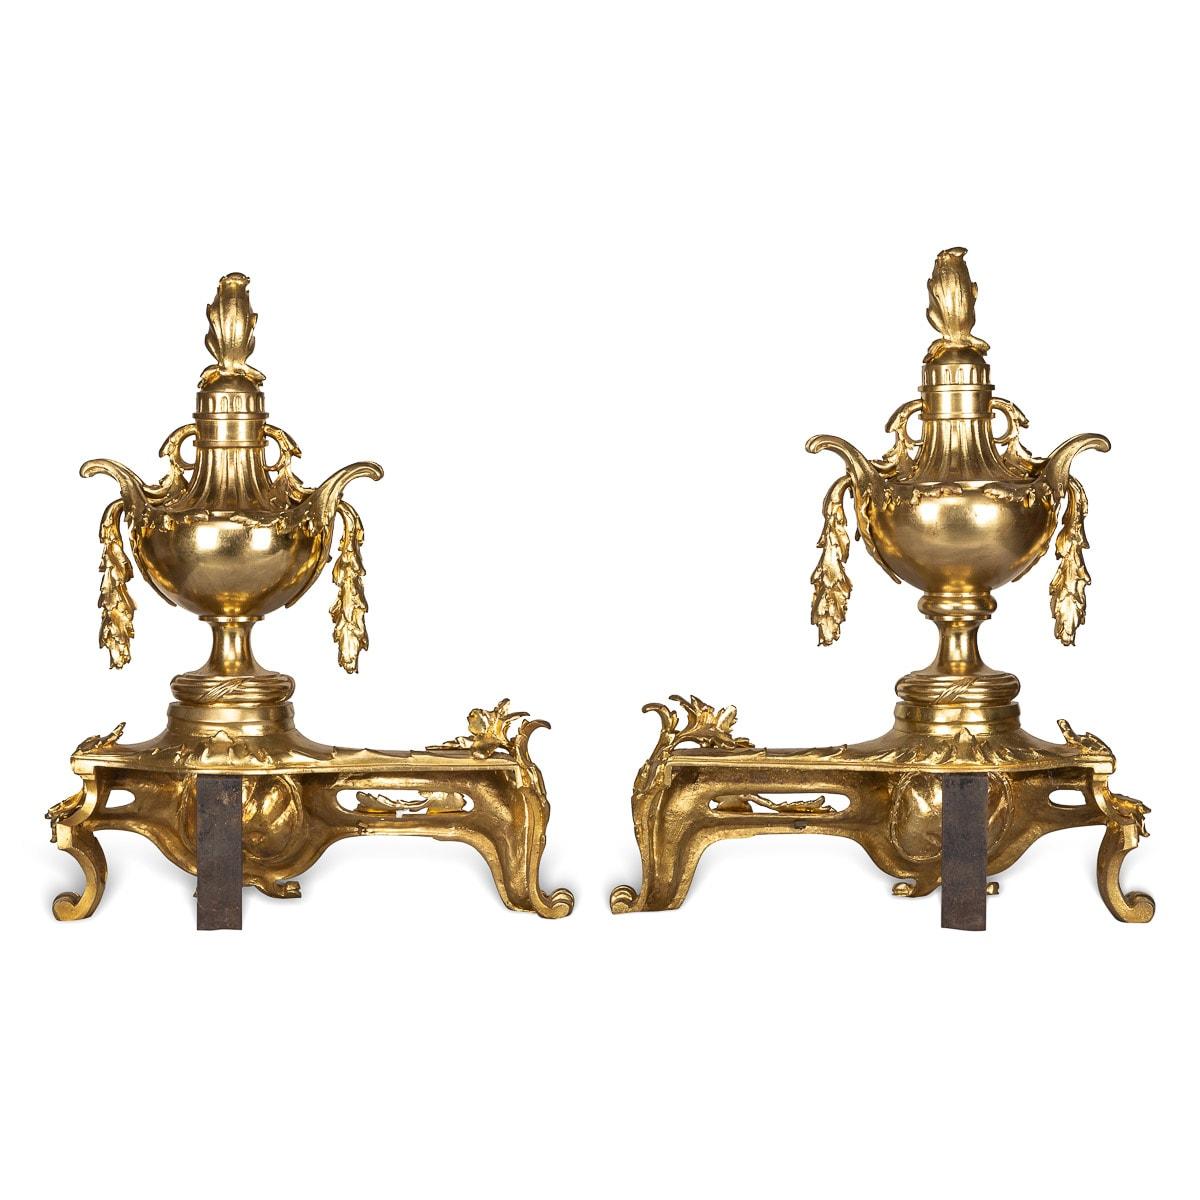 Antique 19th century French beautifully cast pair of gilt bronze fireplace chenets. These chenets are adorned with beautiful floral decoration, scrolls, garlands and swags, with two lidded uns and on scroll feet.

CONDITION
In Great Condition -